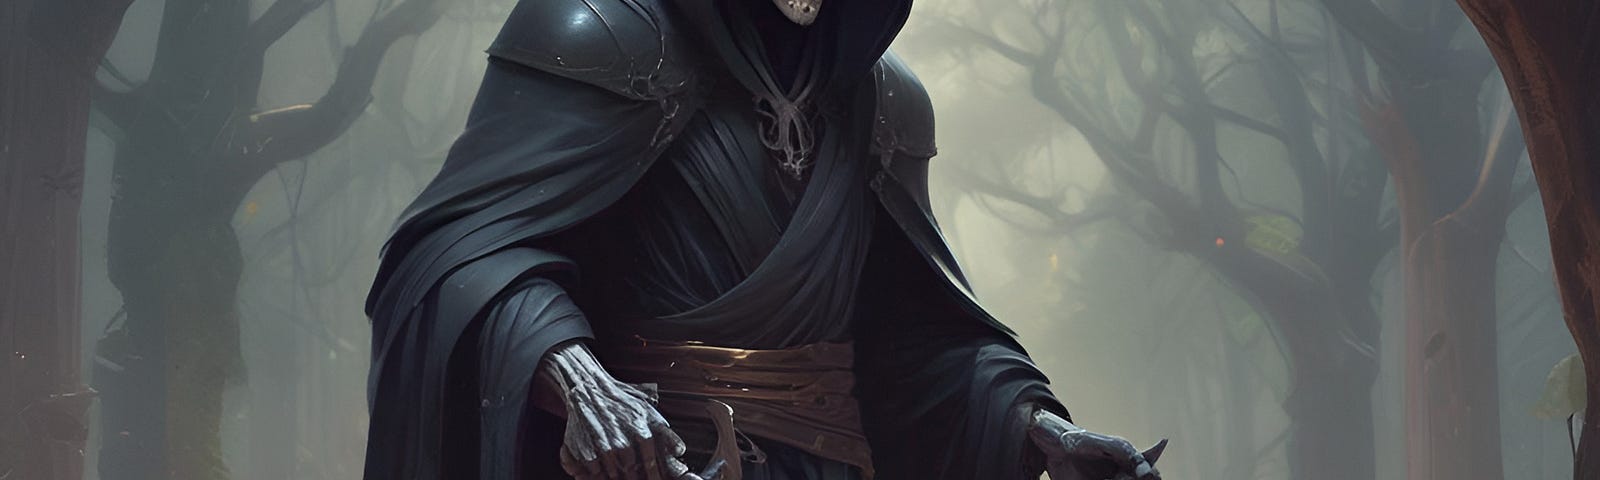 Grim Reaper looking as annoyed as it can